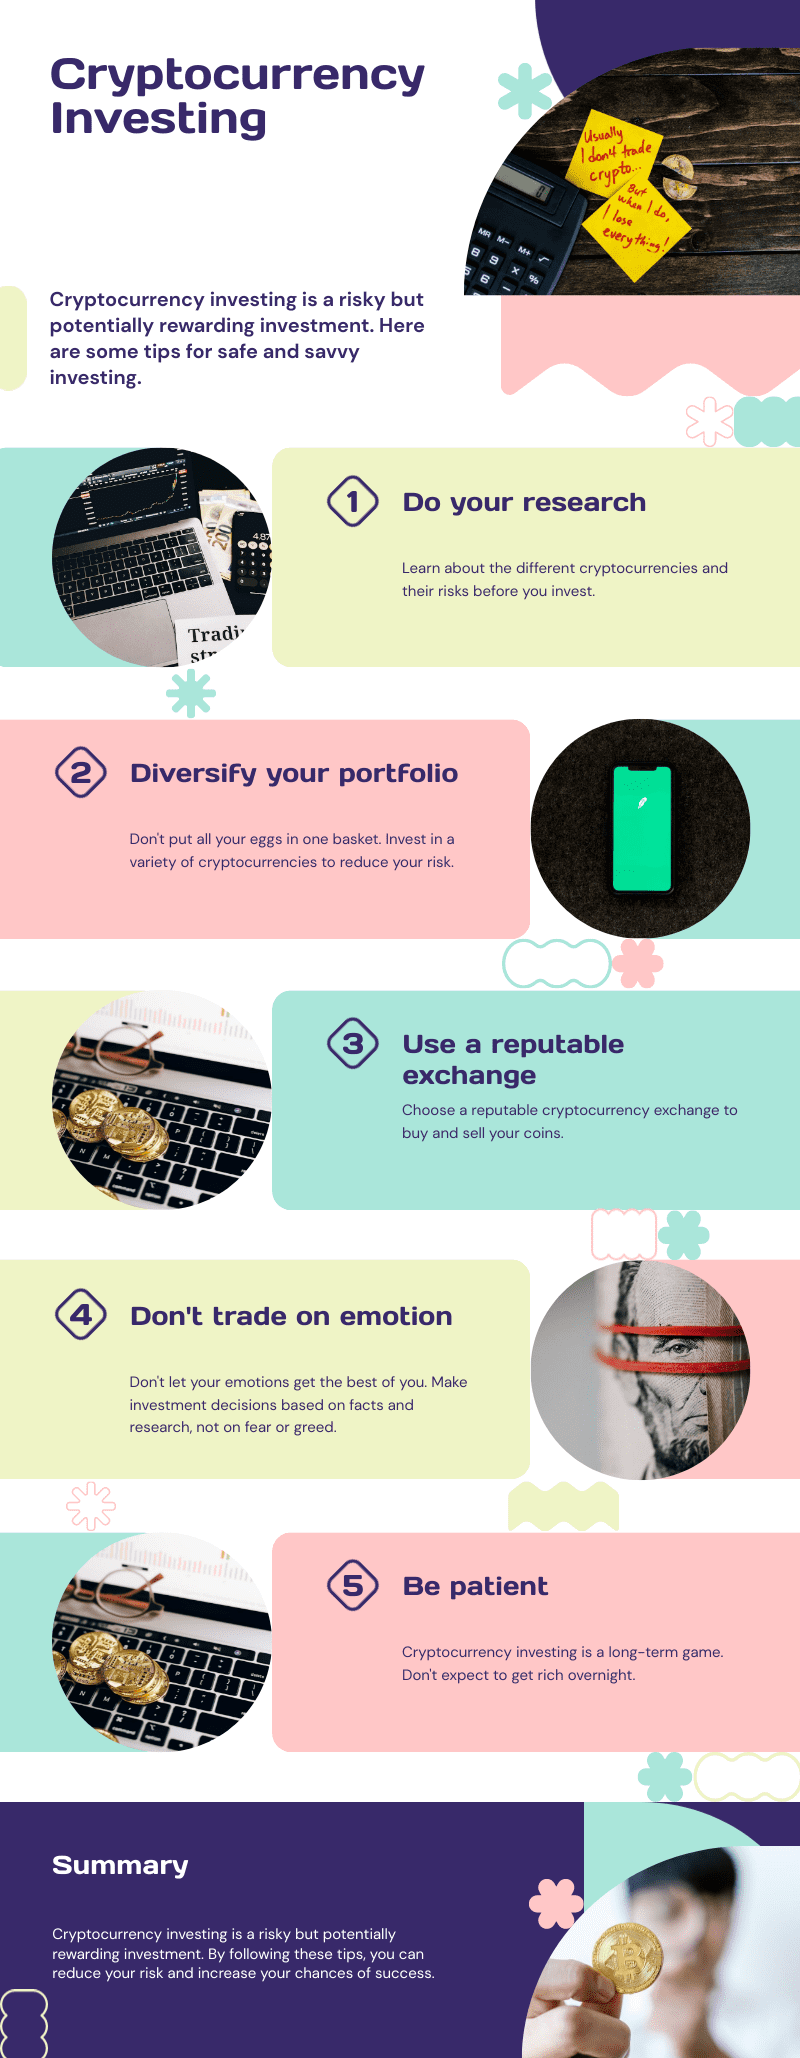 Infographic titled 'Cryptocurrency Investing' offers tips: Do your research, Diversify your portfolio, Use a reputable exchange, Don't trade on emotion, and Be patient. It emphasizes informed and cautious investment with simple icons and brief points.